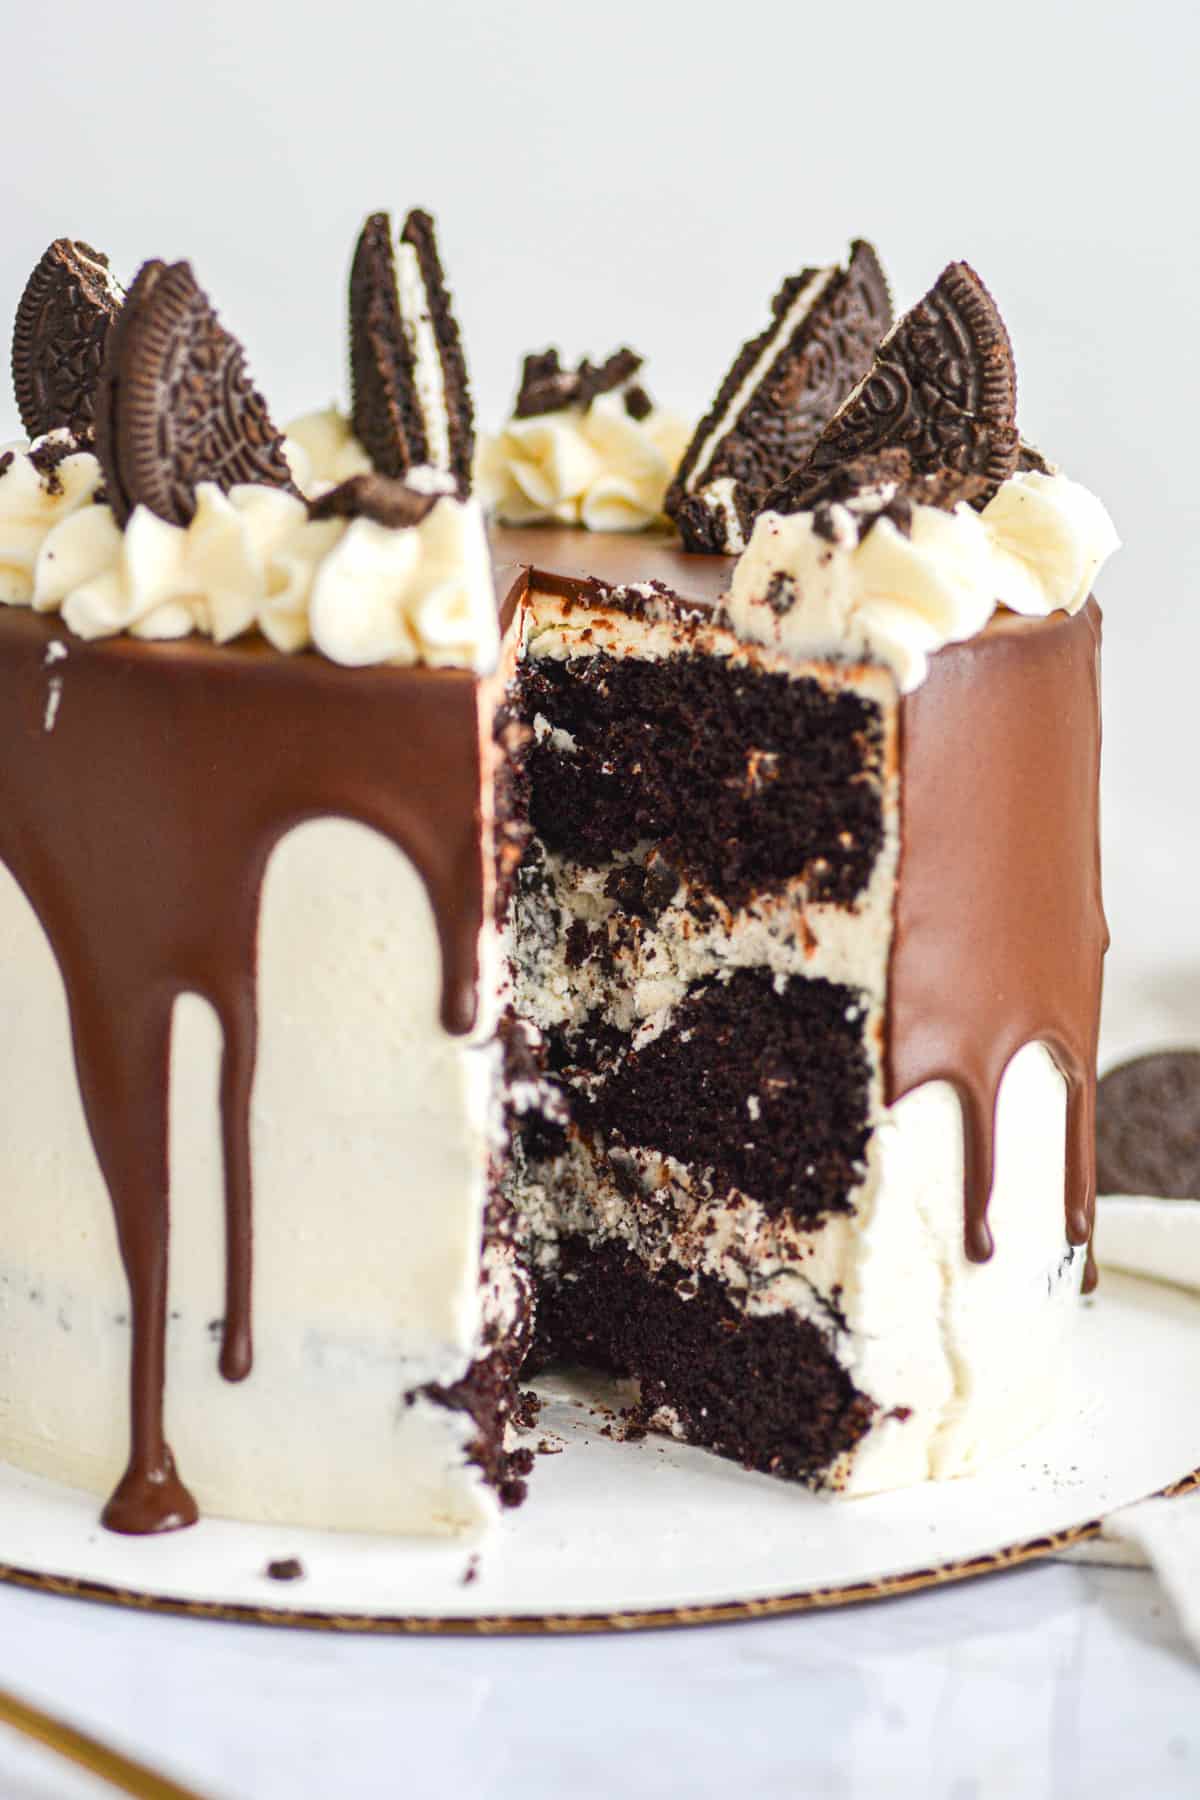 Vegan Oreo Drip Cake with a slice taken out of it so you can see the chocolate cake layers and Oreo buttercream.